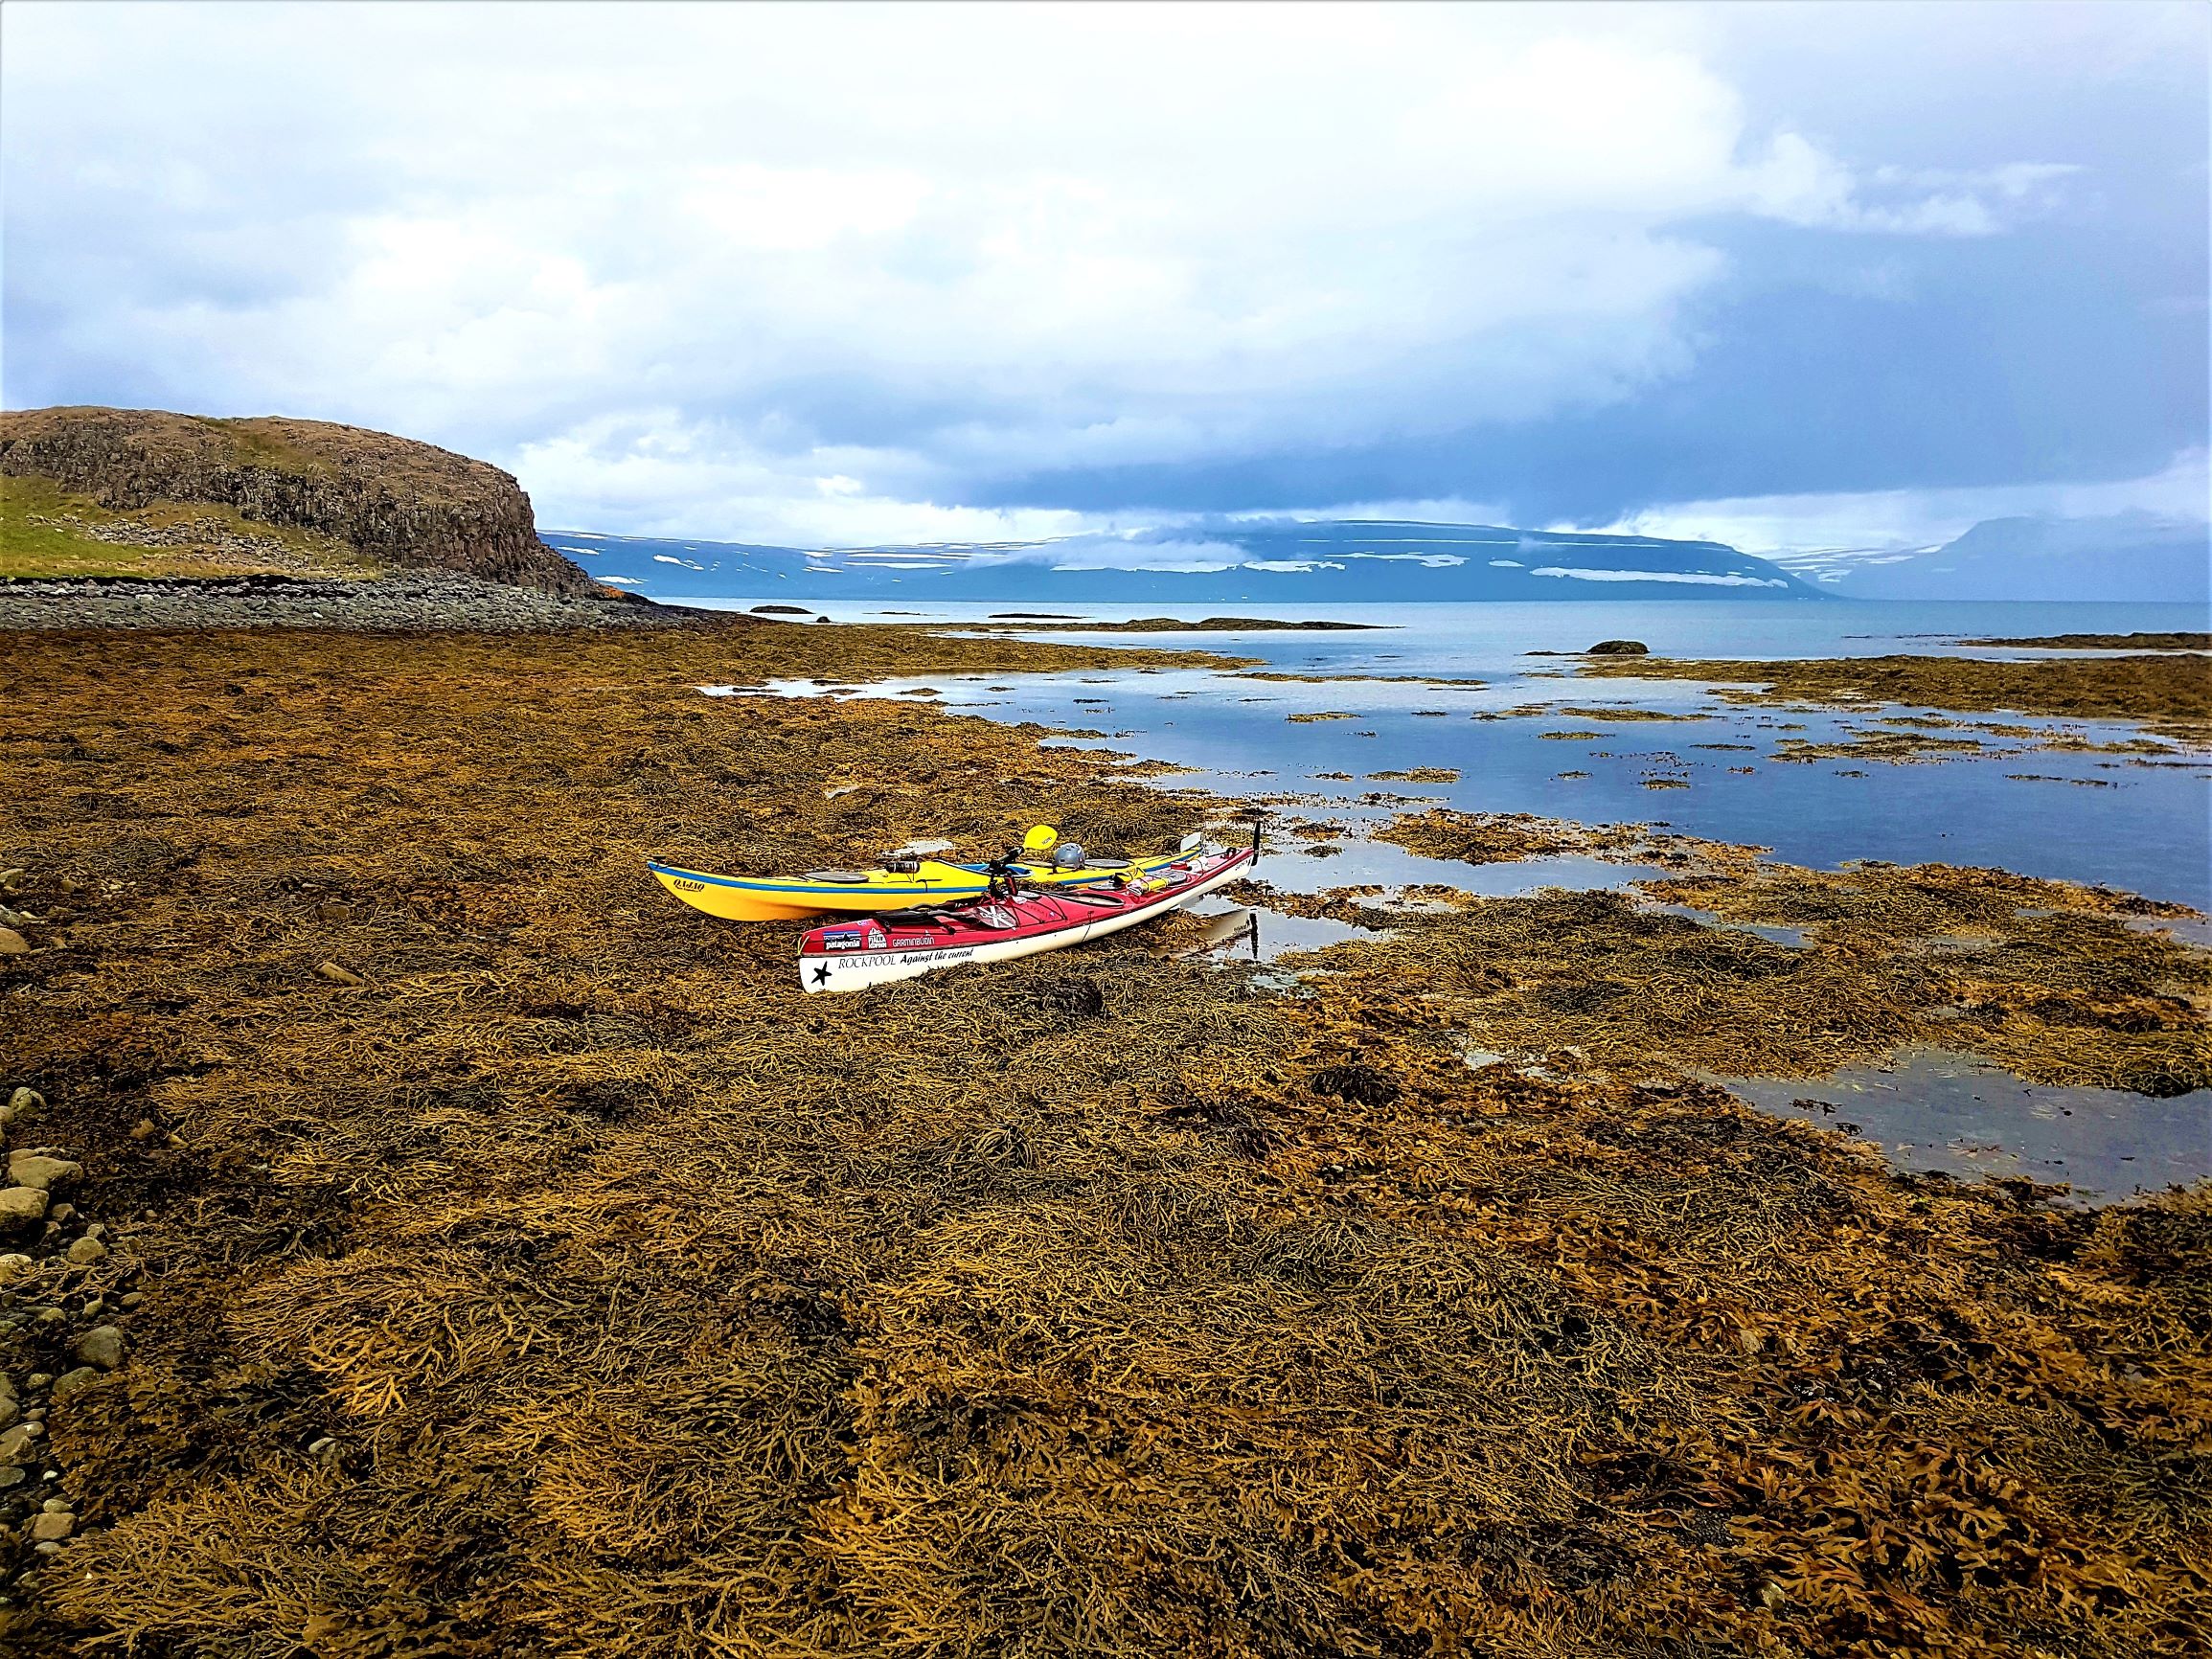 Two kayaks on the seaweed at the shore of Isafjordur in West Iceland